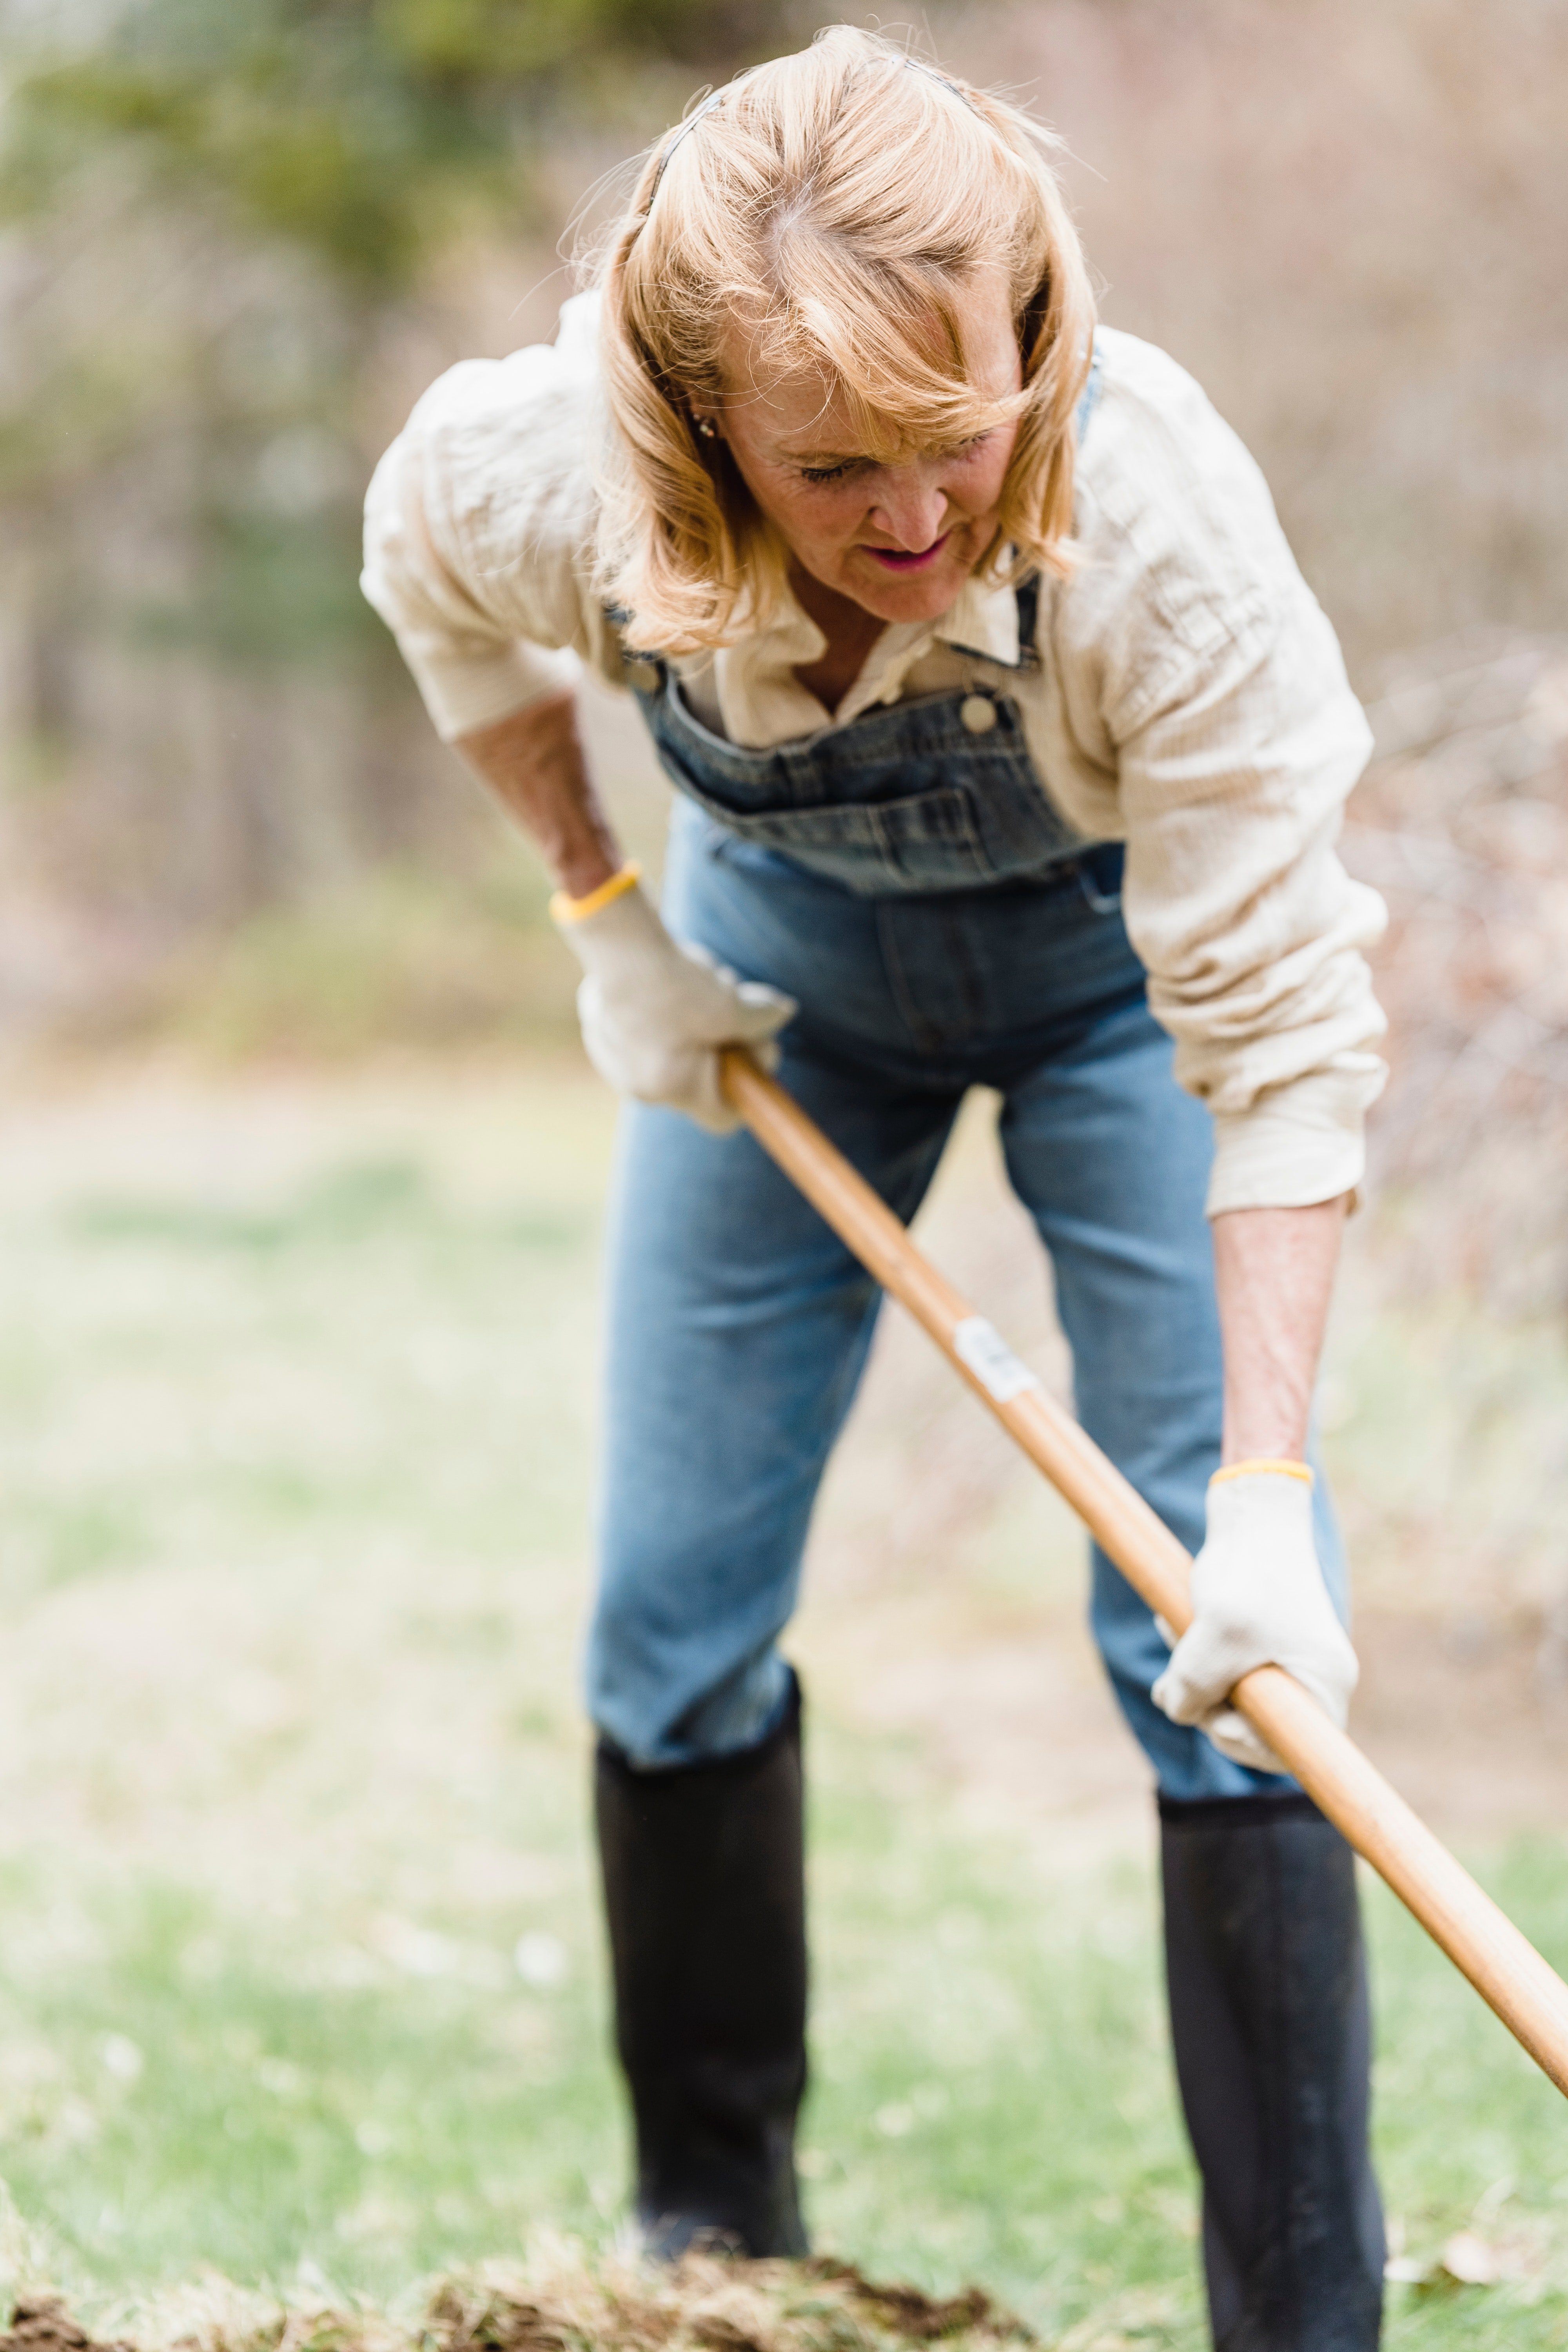 Lorena asked the woman who she was and what she was doing in her yard. | Source: Pexels